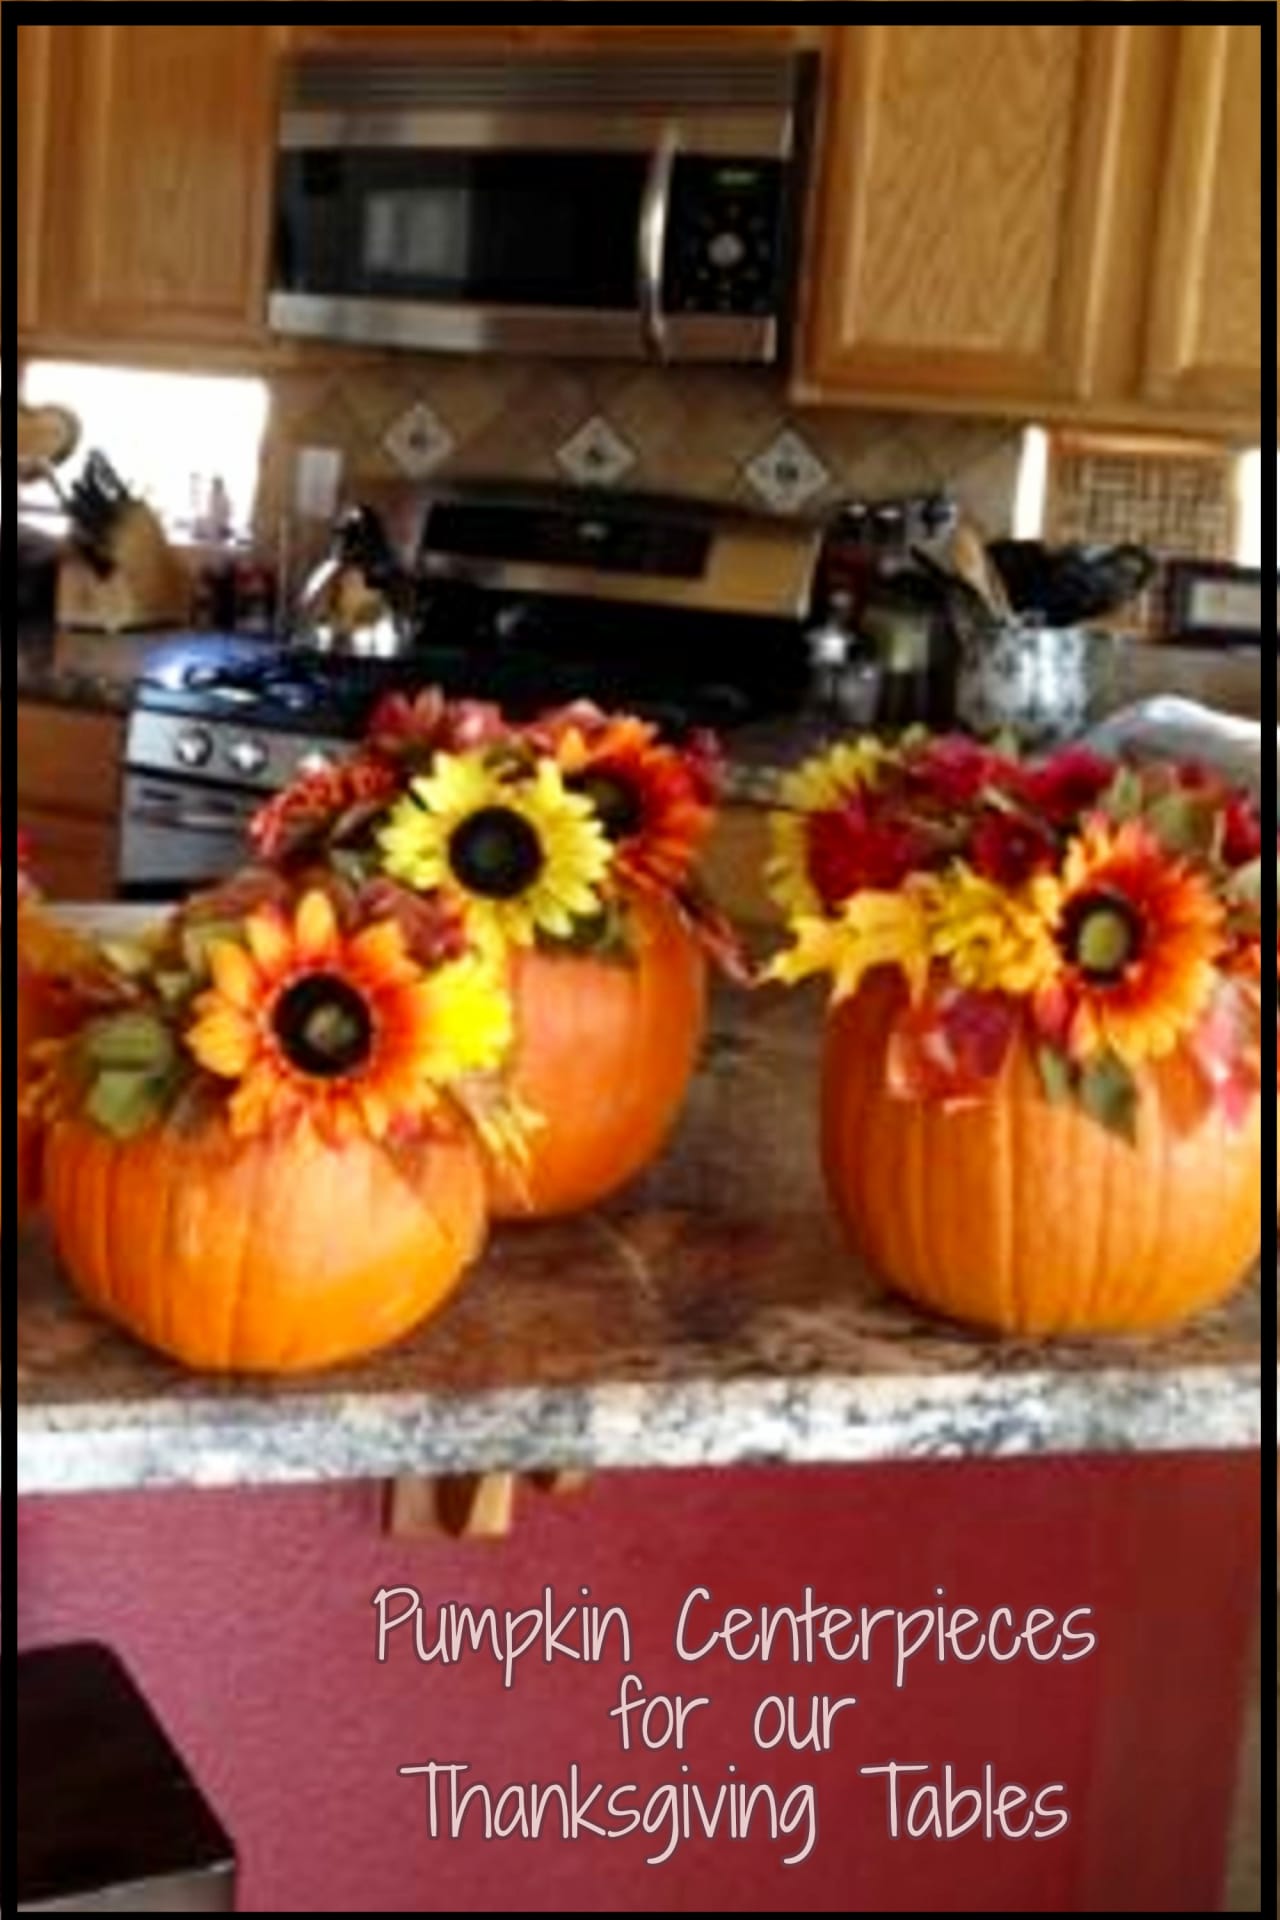 Simple pumpkin centerpieces ideas for your Thanksgiving table setting or Fall decor for the home.  DIY fall pumpkin centerpieces for a Fall wedding, Thanksgiving dinner both rustic and elegant with sunflowers!